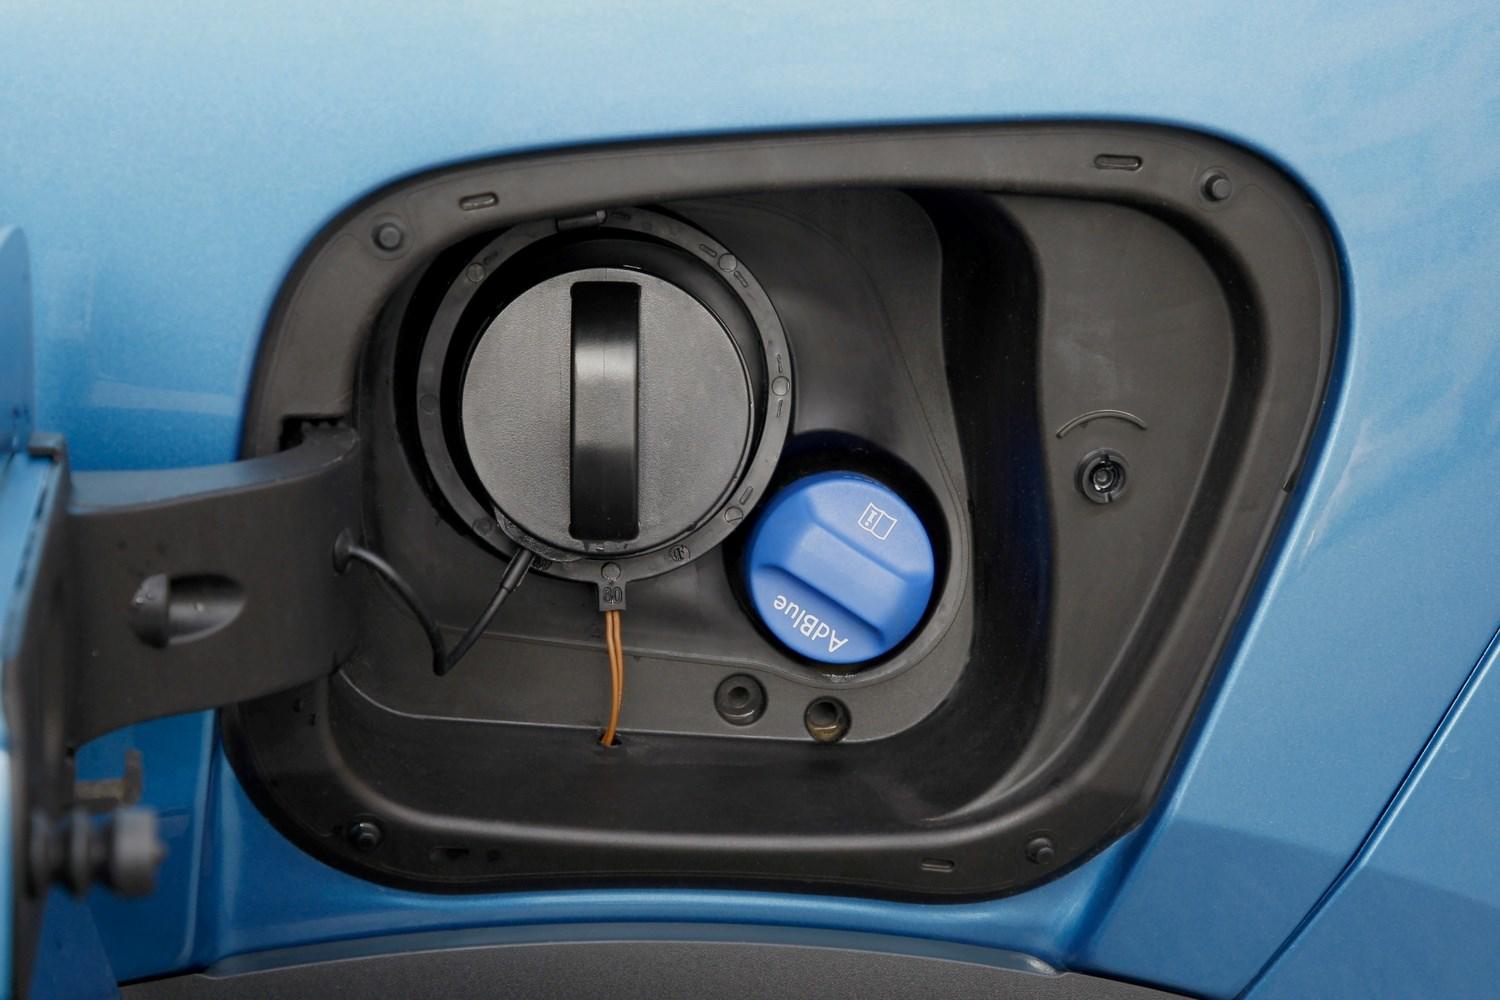 Close-up of AdBlue cap next to the fuel cap on a vehicle